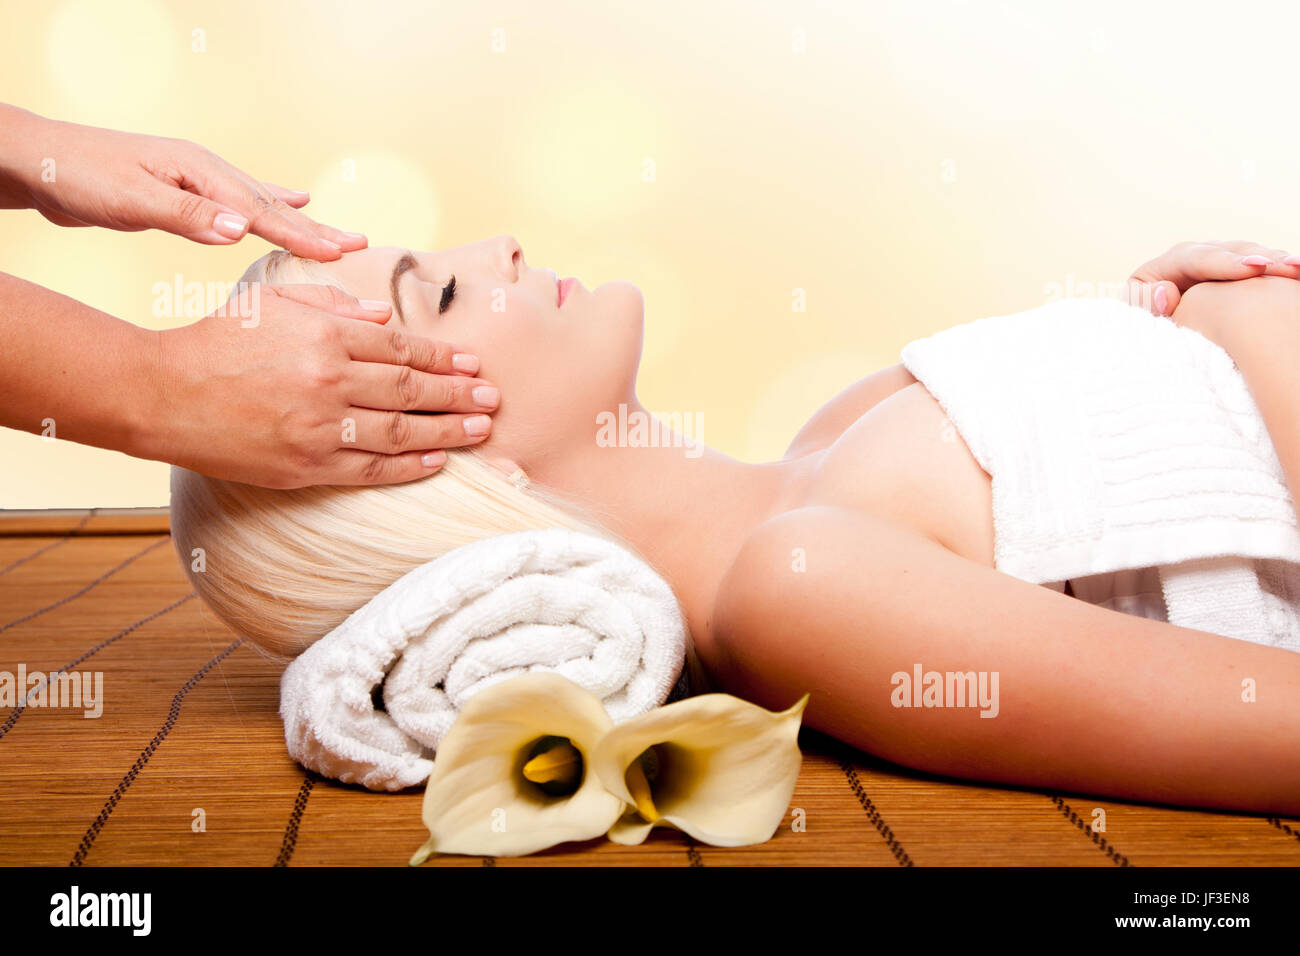 Massage relaxation spa Banque D'Images